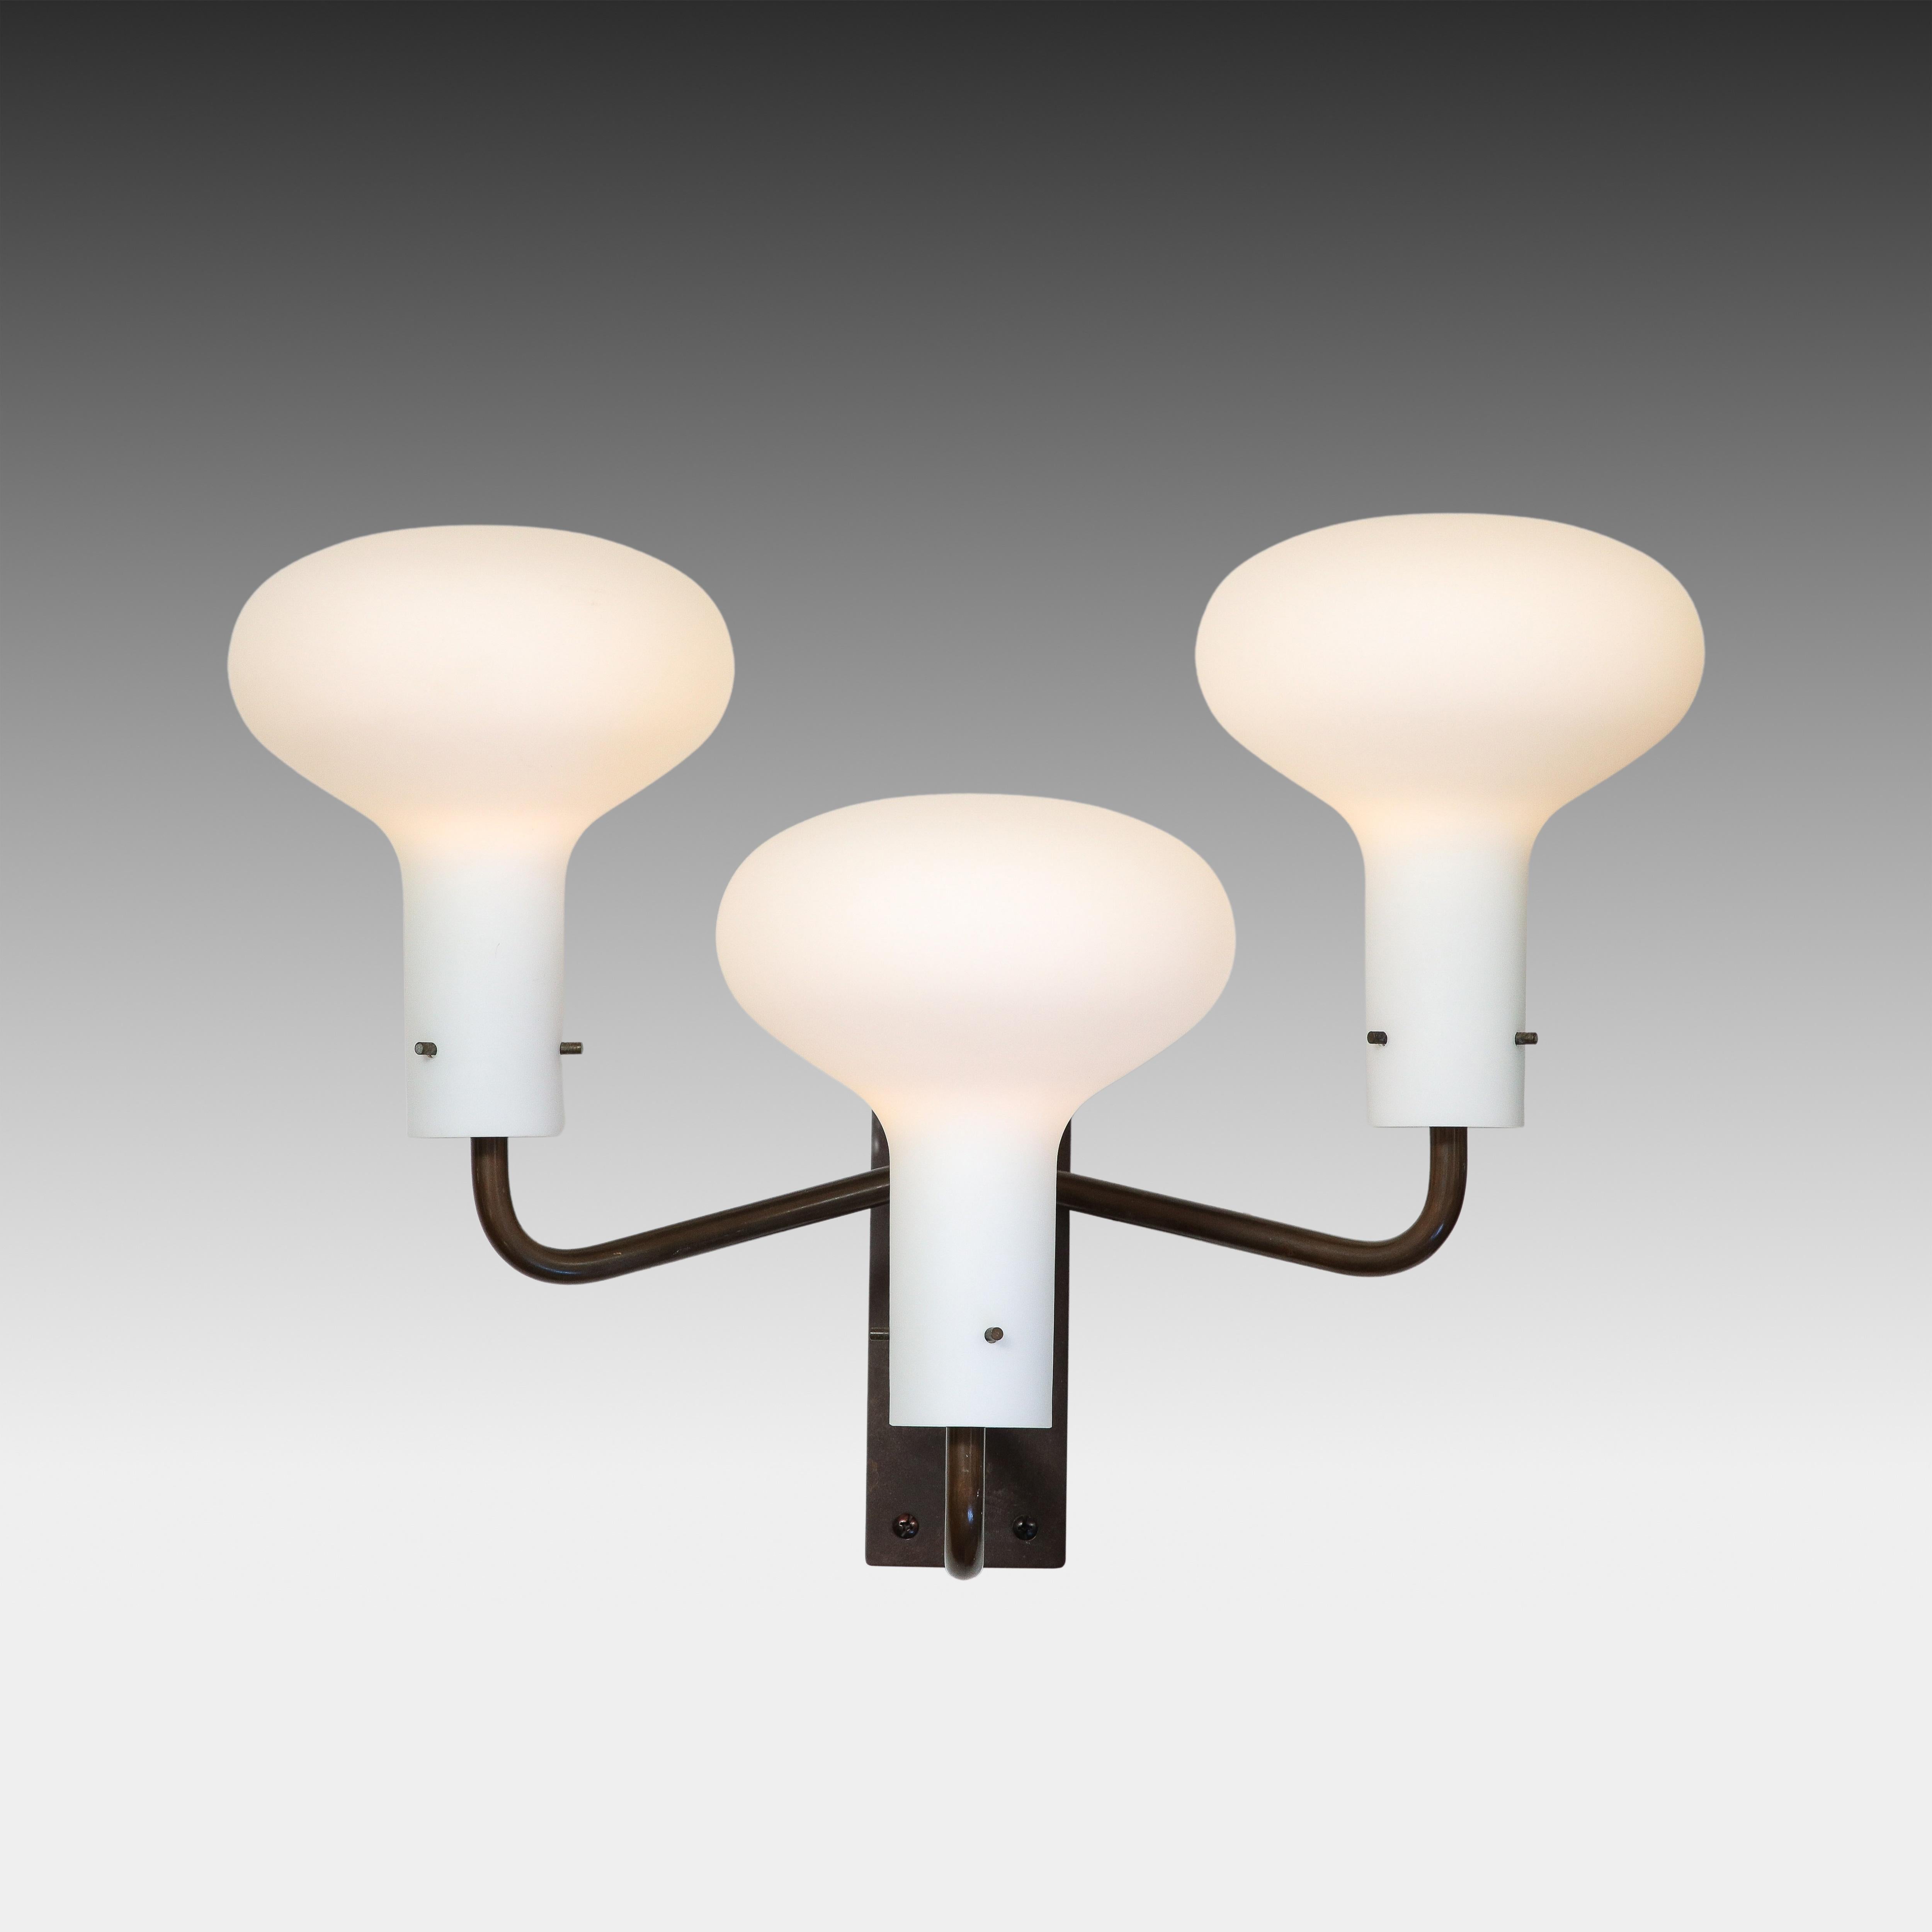 Mid-Century Modern Ignazio Gardella for Azucena Pair of Wall Lights Model LP12, Italy, 1950s For Sale